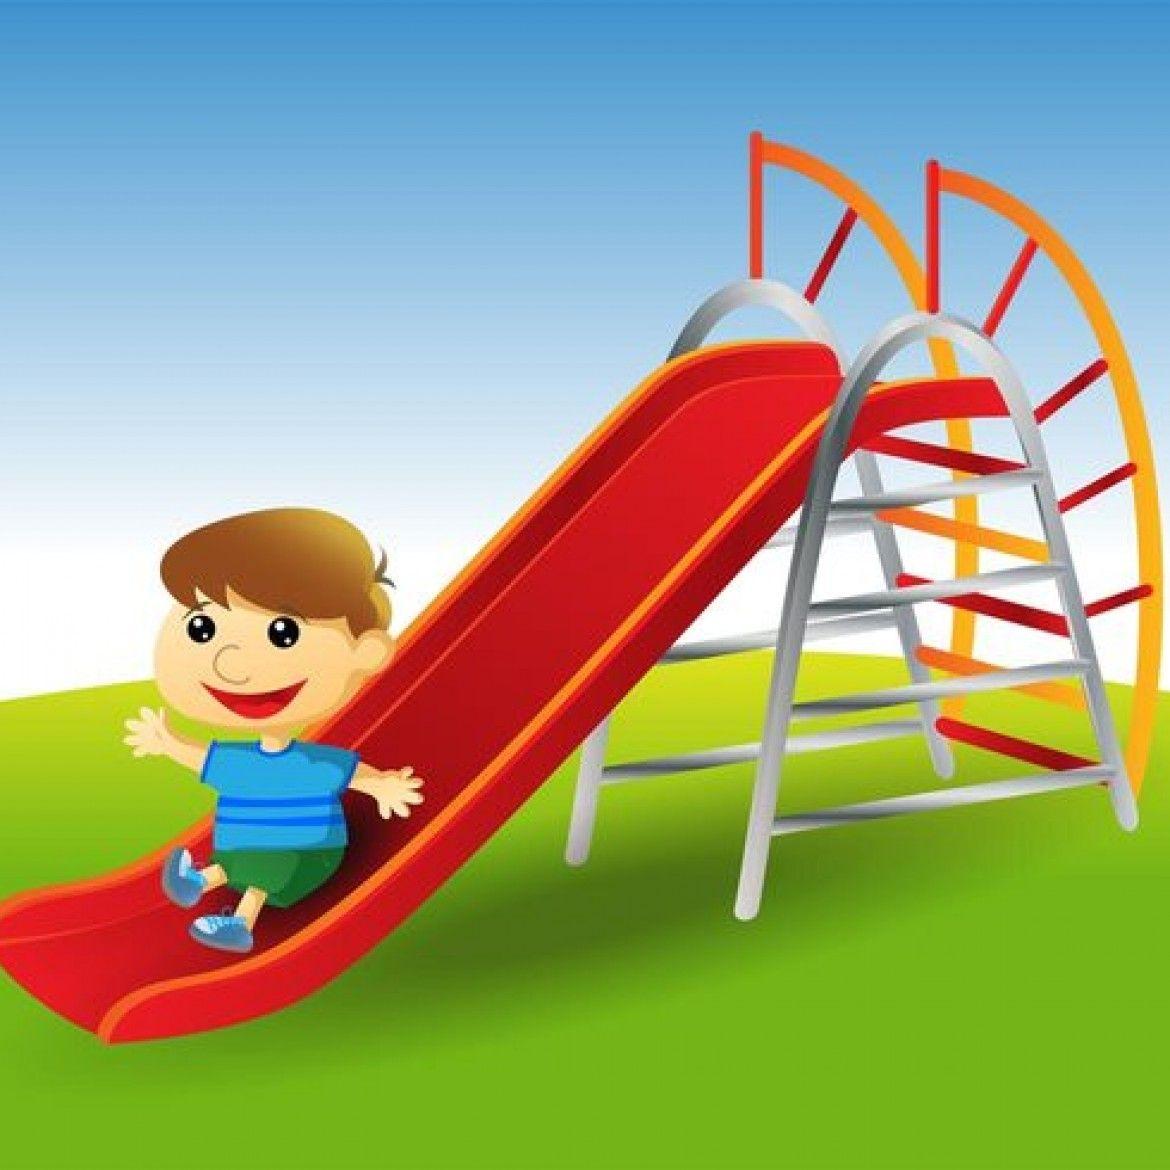 816315 Playground Images Stock Photos  Vectors  Shutterstock